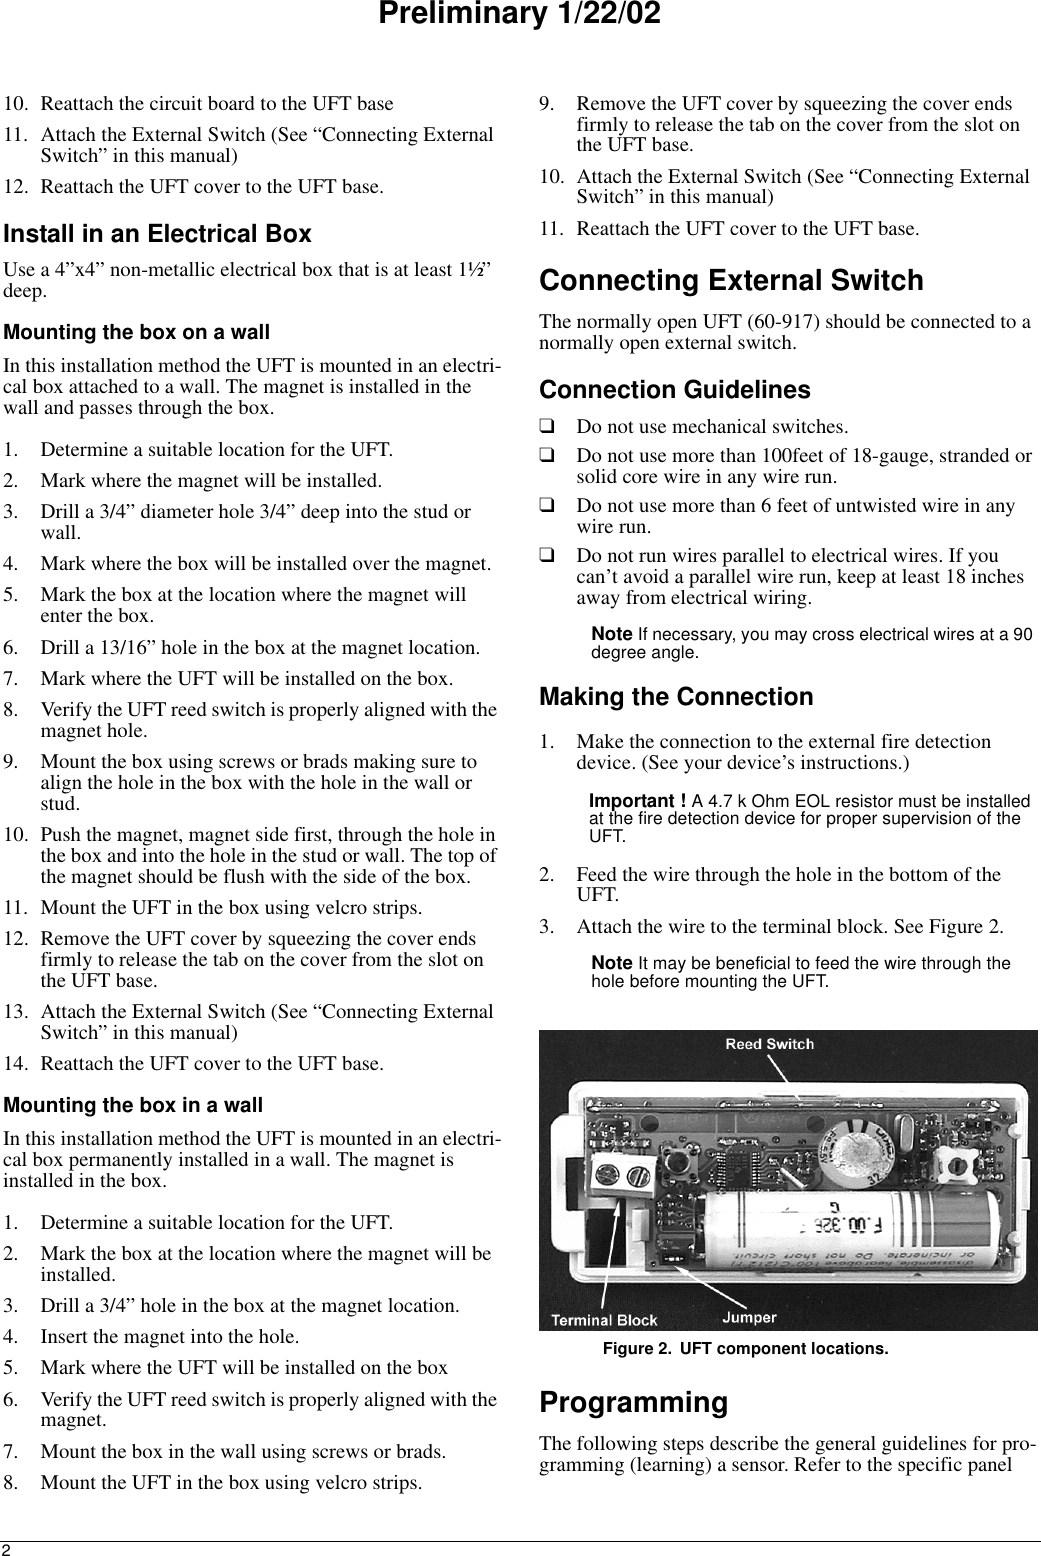 2Preliminary 1/22/0210. Reattach the circuit board to the UFT base11. Attach the External Switch (See “Connecting External Switch” in this manual)12. Reattach the UFT cover to the UFT base.Install in an Electrical BoxUse a 4”x4” non-metallic electrical box that is at least 1½”  deep.Mounting the box on a wallIn this installation method the UFT is mounted in an electri-cal box attached to a wall. The magnet is installed in the wall and passes through the box.1. Determine a suitable location for the UFT.2. Mark where the magnet will be installed.3. Drill a 3/4” diameter hole 3/4” deep into the stud or wall.4. Mark where the box will be installed over the magnet.5. Mark the box at the location where the magnet will enter the box.6. Drill a 13/16” hole in the box at the magnet location.7. Mark where the UFT will be installed on the box.8. Verify the UFT reed switch is properly aligned with the magnet hole.9. Mount the box using screws or brads making sure to align the hole in the box with the hole in the wall or stud.10. Push the magnet, magnet side first, through the hole in the box and into the hole in the stud or wall. The top of the magnet should be flush with the side of the box.11. Mount the UFT in the box using velcro strips.12. Remove the UFT cover by squeezing the cover ends firmly to release the tab on the cover from the slot on the UFT base.13. Attach the External Switch (See “Connecting External Switch” in this manual)14. Reattach the UFT cover to the UFT base.Mounting the box in a wallIn this installation method the UFT is mounted in an electri-cal box permanently installed in a wall. The magnet is installed in the box.1. Determine a suitable location for the UFT.2. Mark the box at the location where the magnet will be installed.3. Drill a 3/4” hole in the box at the magnet location.4. Insert the magnet into the hole.5. Mark where the UFT will be installed on the box6. Verify the UFT reed switch is properly aligned with the magnet.7. Mount the box in the wall using screws or brads.8. Mount the UFT in the box using velcro strips.9. Remove the UFT cover by squeezing the cover ends firmly to release the tab on the cover from the slot on the UFT base.10. Attach the External Switch (See “Connecting External Switch” in this manual)11. Reattach the UFT cover to the UFT base.Connecting External SwitchThe normally open UFT (60-917) should be connected to a normally open external switch. Connection Guidelines❑Do not use mechanical switches.❑Do not use more than 100feet of 18-gauge, stranded or solid core wire in any wire run.❑Do not use more than 6 feet of untwisted wire in any wire run.❑Do not run wires parallel to electrical wires. If you can’t avoid a parallel wire run, keep at least 18 inches away from electrical wiring.Note If necessary, you may cross electrical wires at a 90 degree angle.Making the Connection1. Make the connection to the external fire detection device. (See your device’s instructions.)Important ! A 4.7 k Ohm EOL resistor must be installed at the fire detection device for proper supervision of the UFT.2. Feed the wire through the hole in the bottom of the UFT.3. Attach the wire to the terminal block. See Figure 2.Note It may be beneficial to feed the wire through the hole before mounting the UFT.Figure 2. UFT component locations.ProgrammingThe following steps describe the general guidelines for pro-gramming (learning) a sensor. Refer to the specific panel 